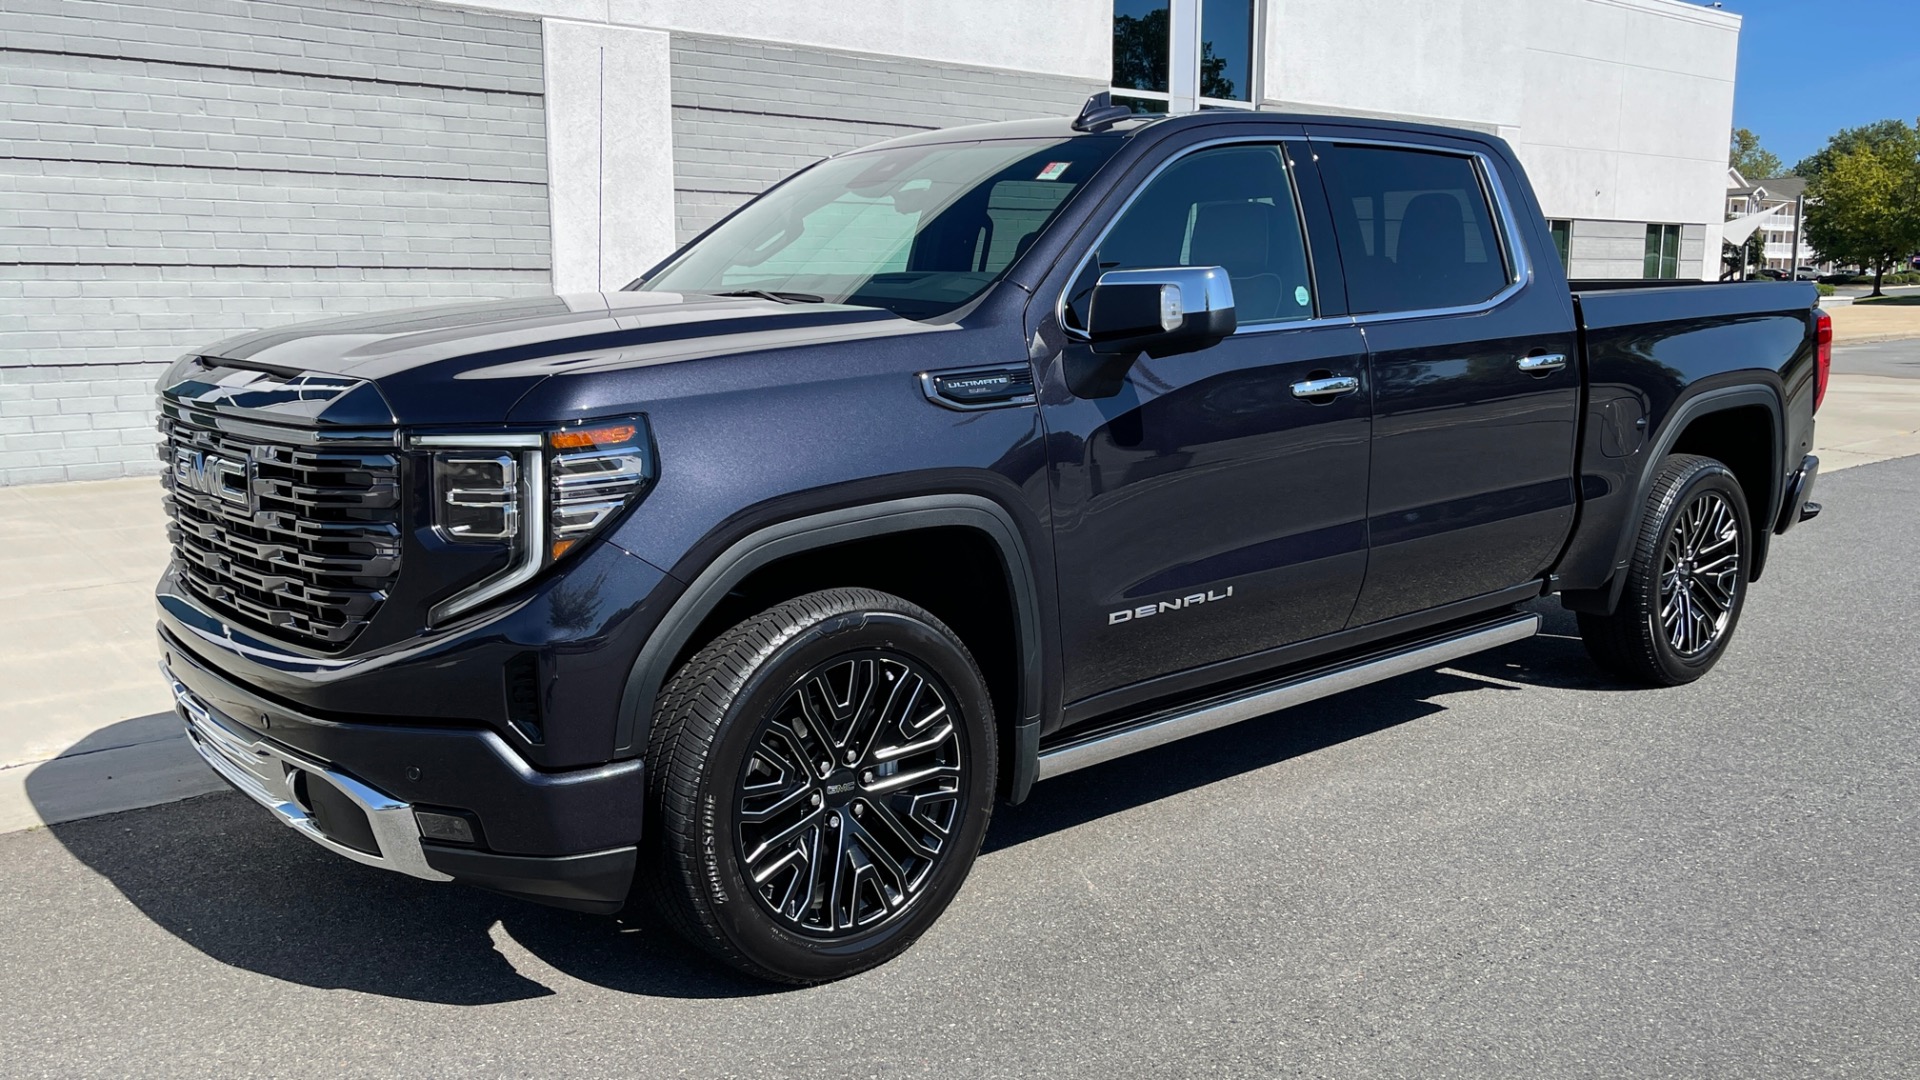 Used 2022 GMC Sierra 1500 DENALI ULTIMATE / 6.2L V8 / 22IN WHEELS / LEATHER / COOLED SEATS for sale $110,500 at Formula Imports in Charlotte NC 28227 2